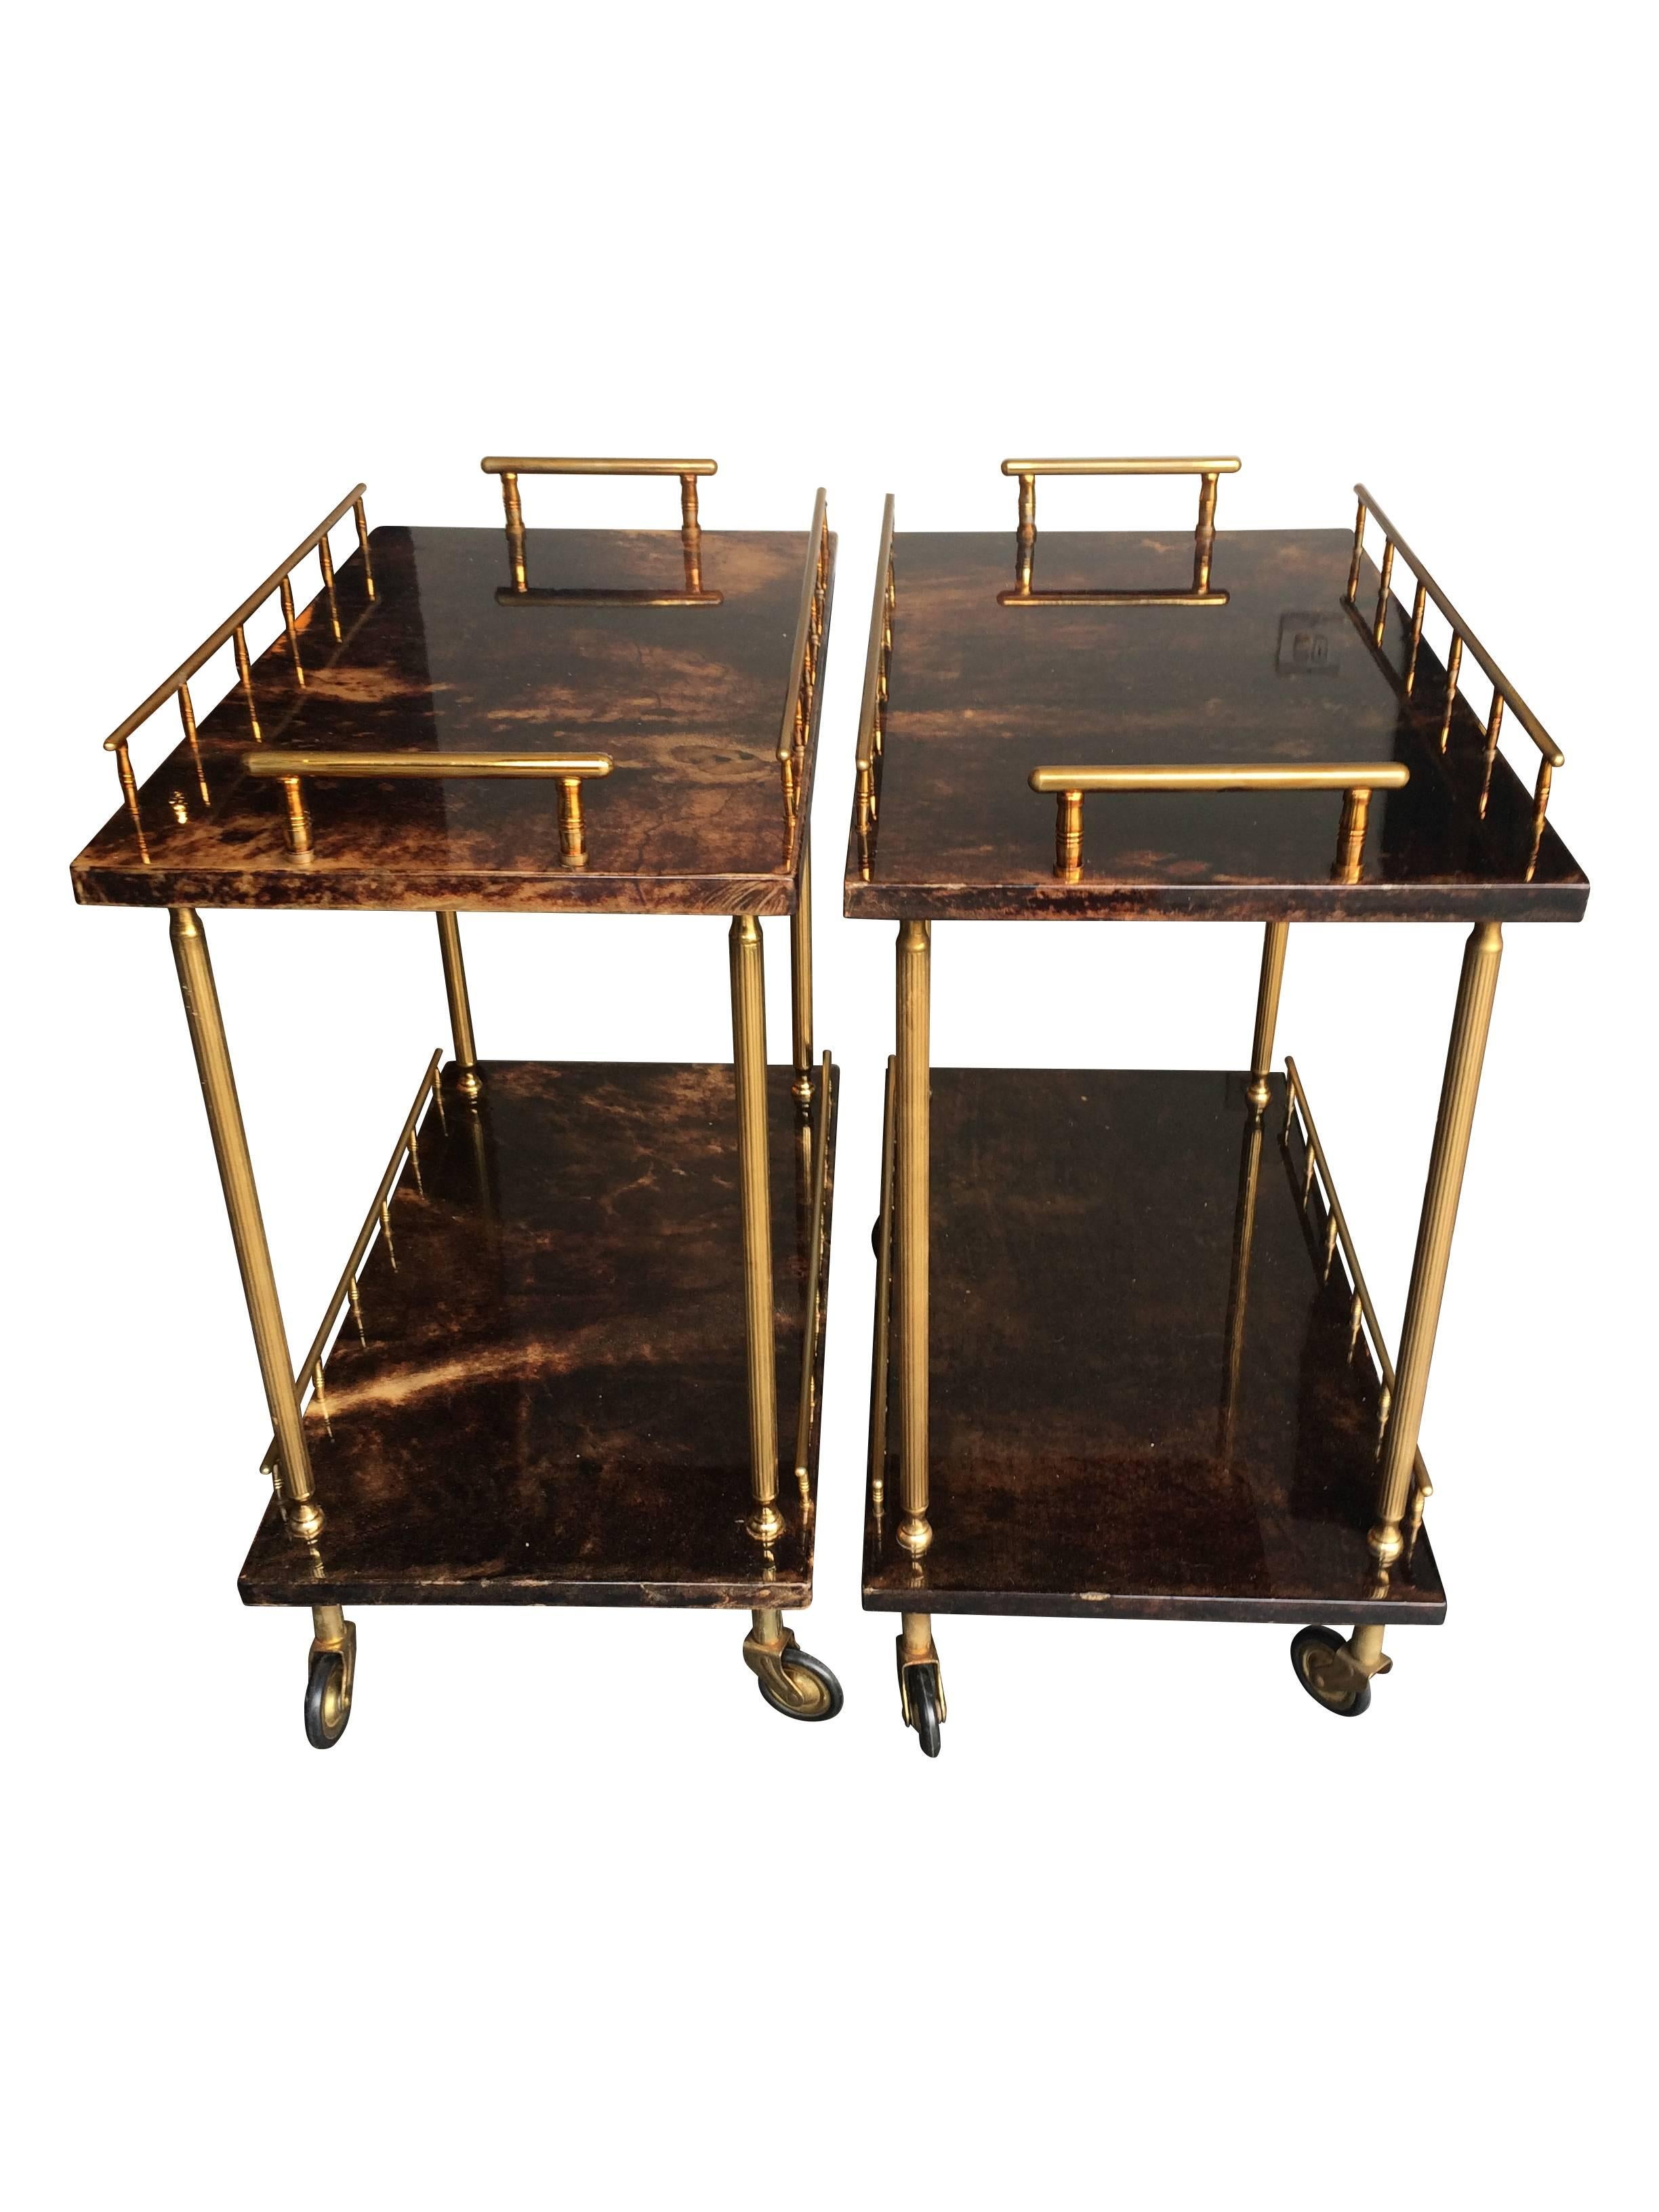 A lovely pair of small Aldo Tura two-tiered bar trollies in gloss lacquered, brown goatskin with brass frame and castors. In good original condition with no fading or staining. A great size and would be ideal to use as side tables or bar trollies.